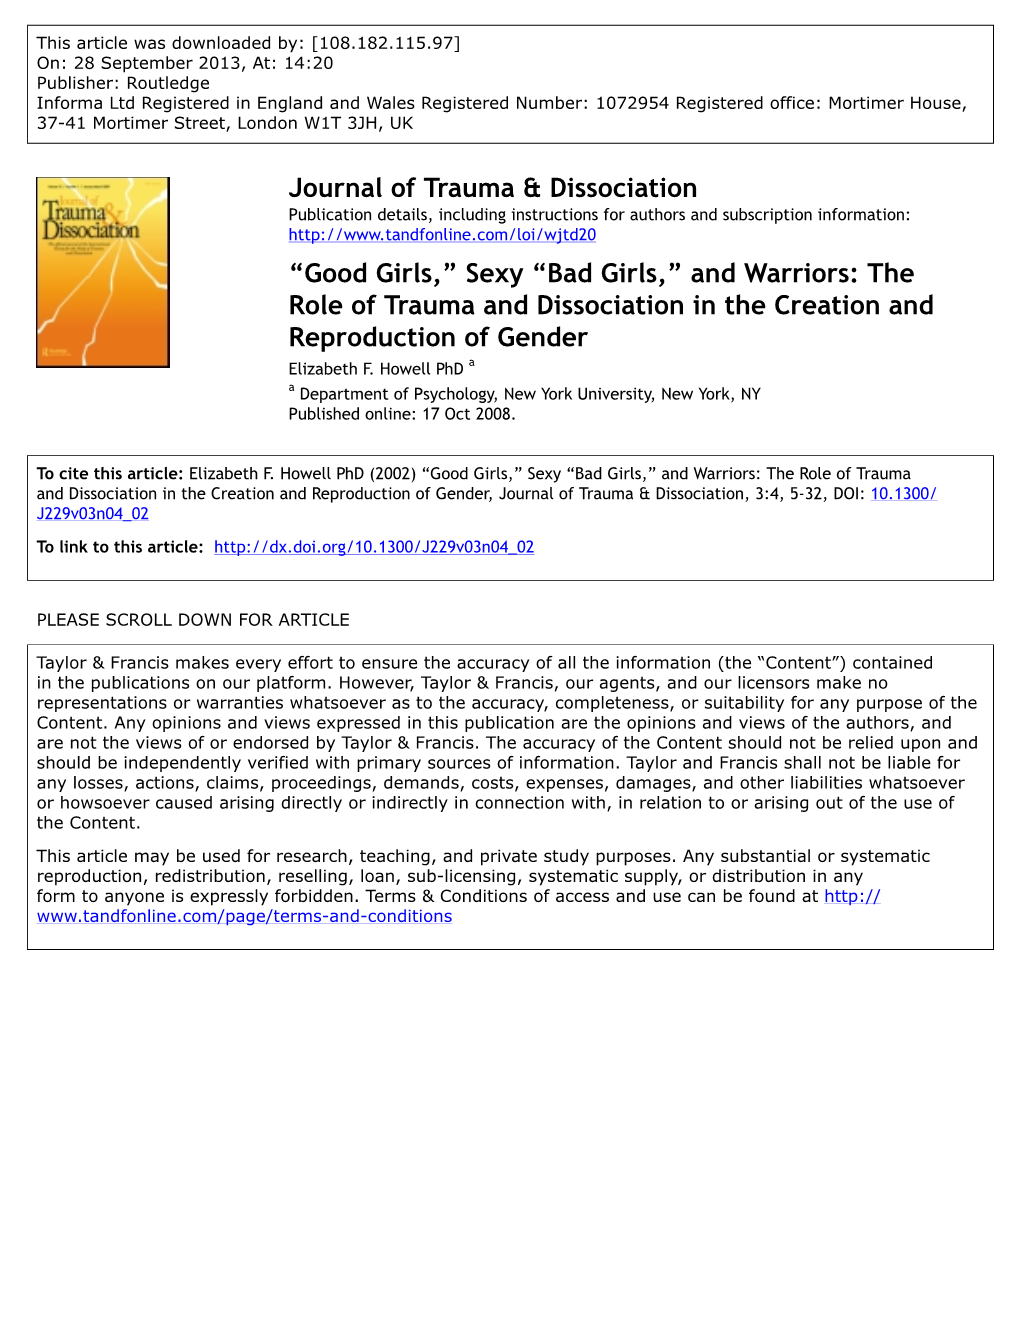 “Good Girls,” Sexy “Bad Girls,” and Warriors: the Role of Trauma and Dissociation in the Creation and Reproduction of Gender Elizabeth F